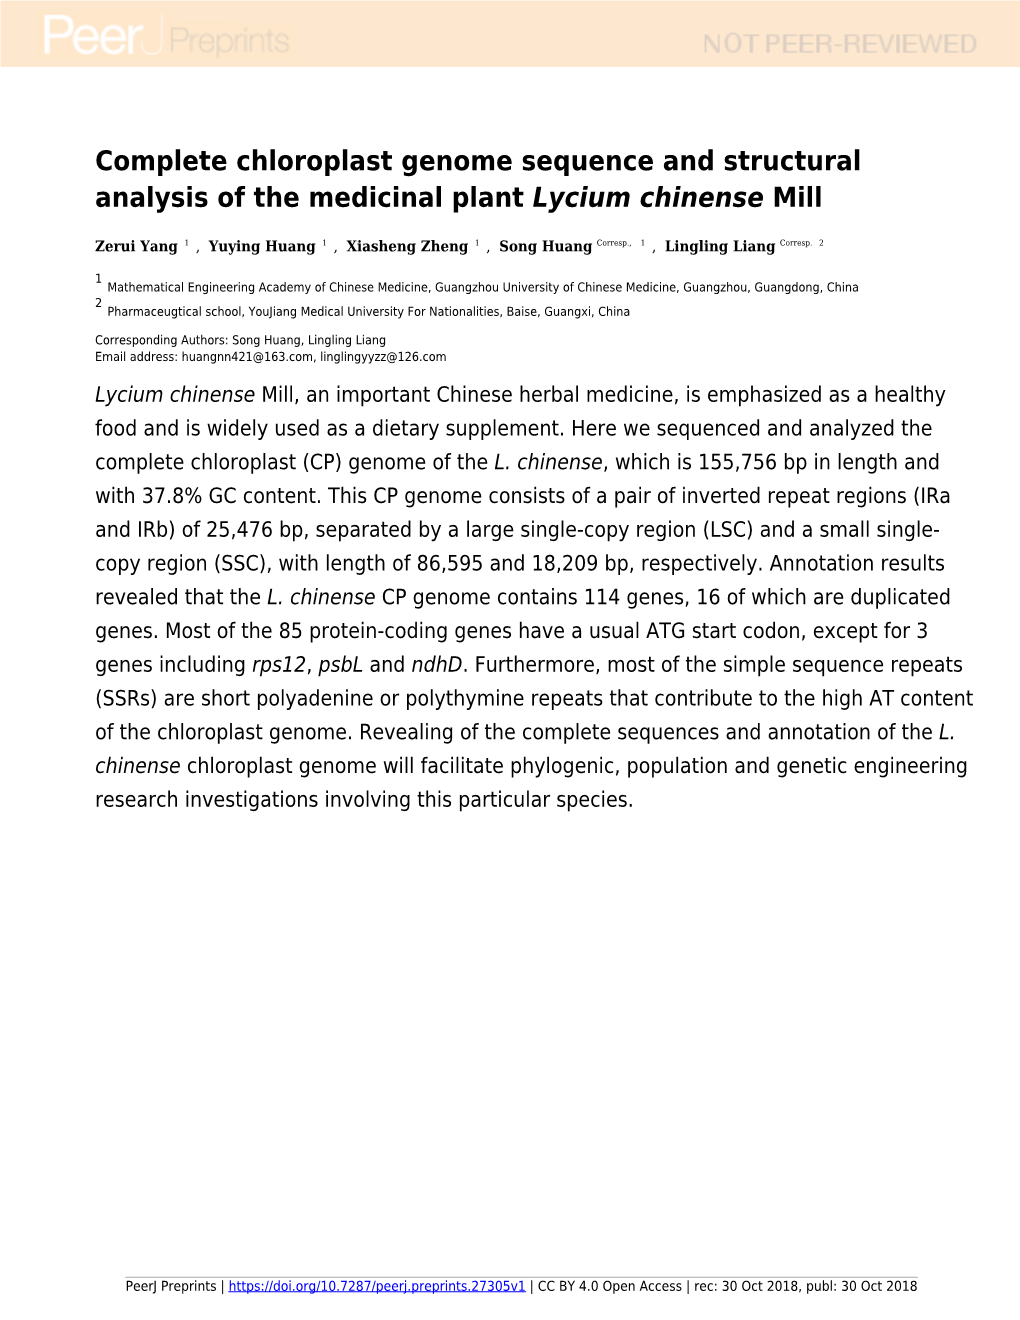 Complete Chloroplast Genome Sequence and Structural Analysis of the Medicinal Plant Lycium Chinense Mill